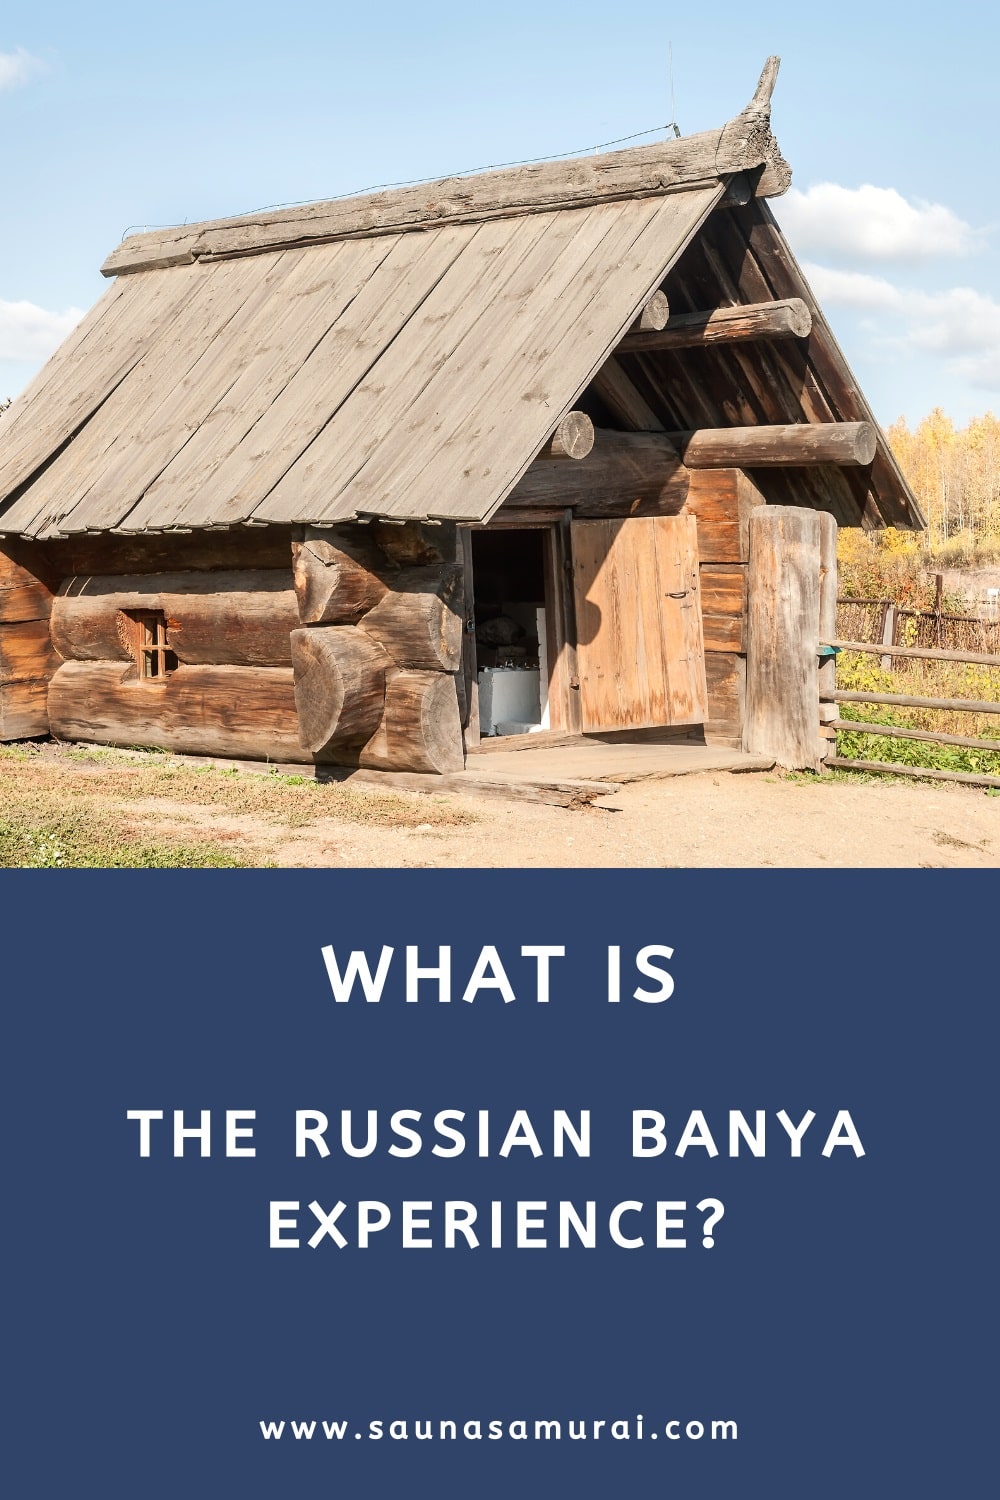 What is the Russian Banya experience?